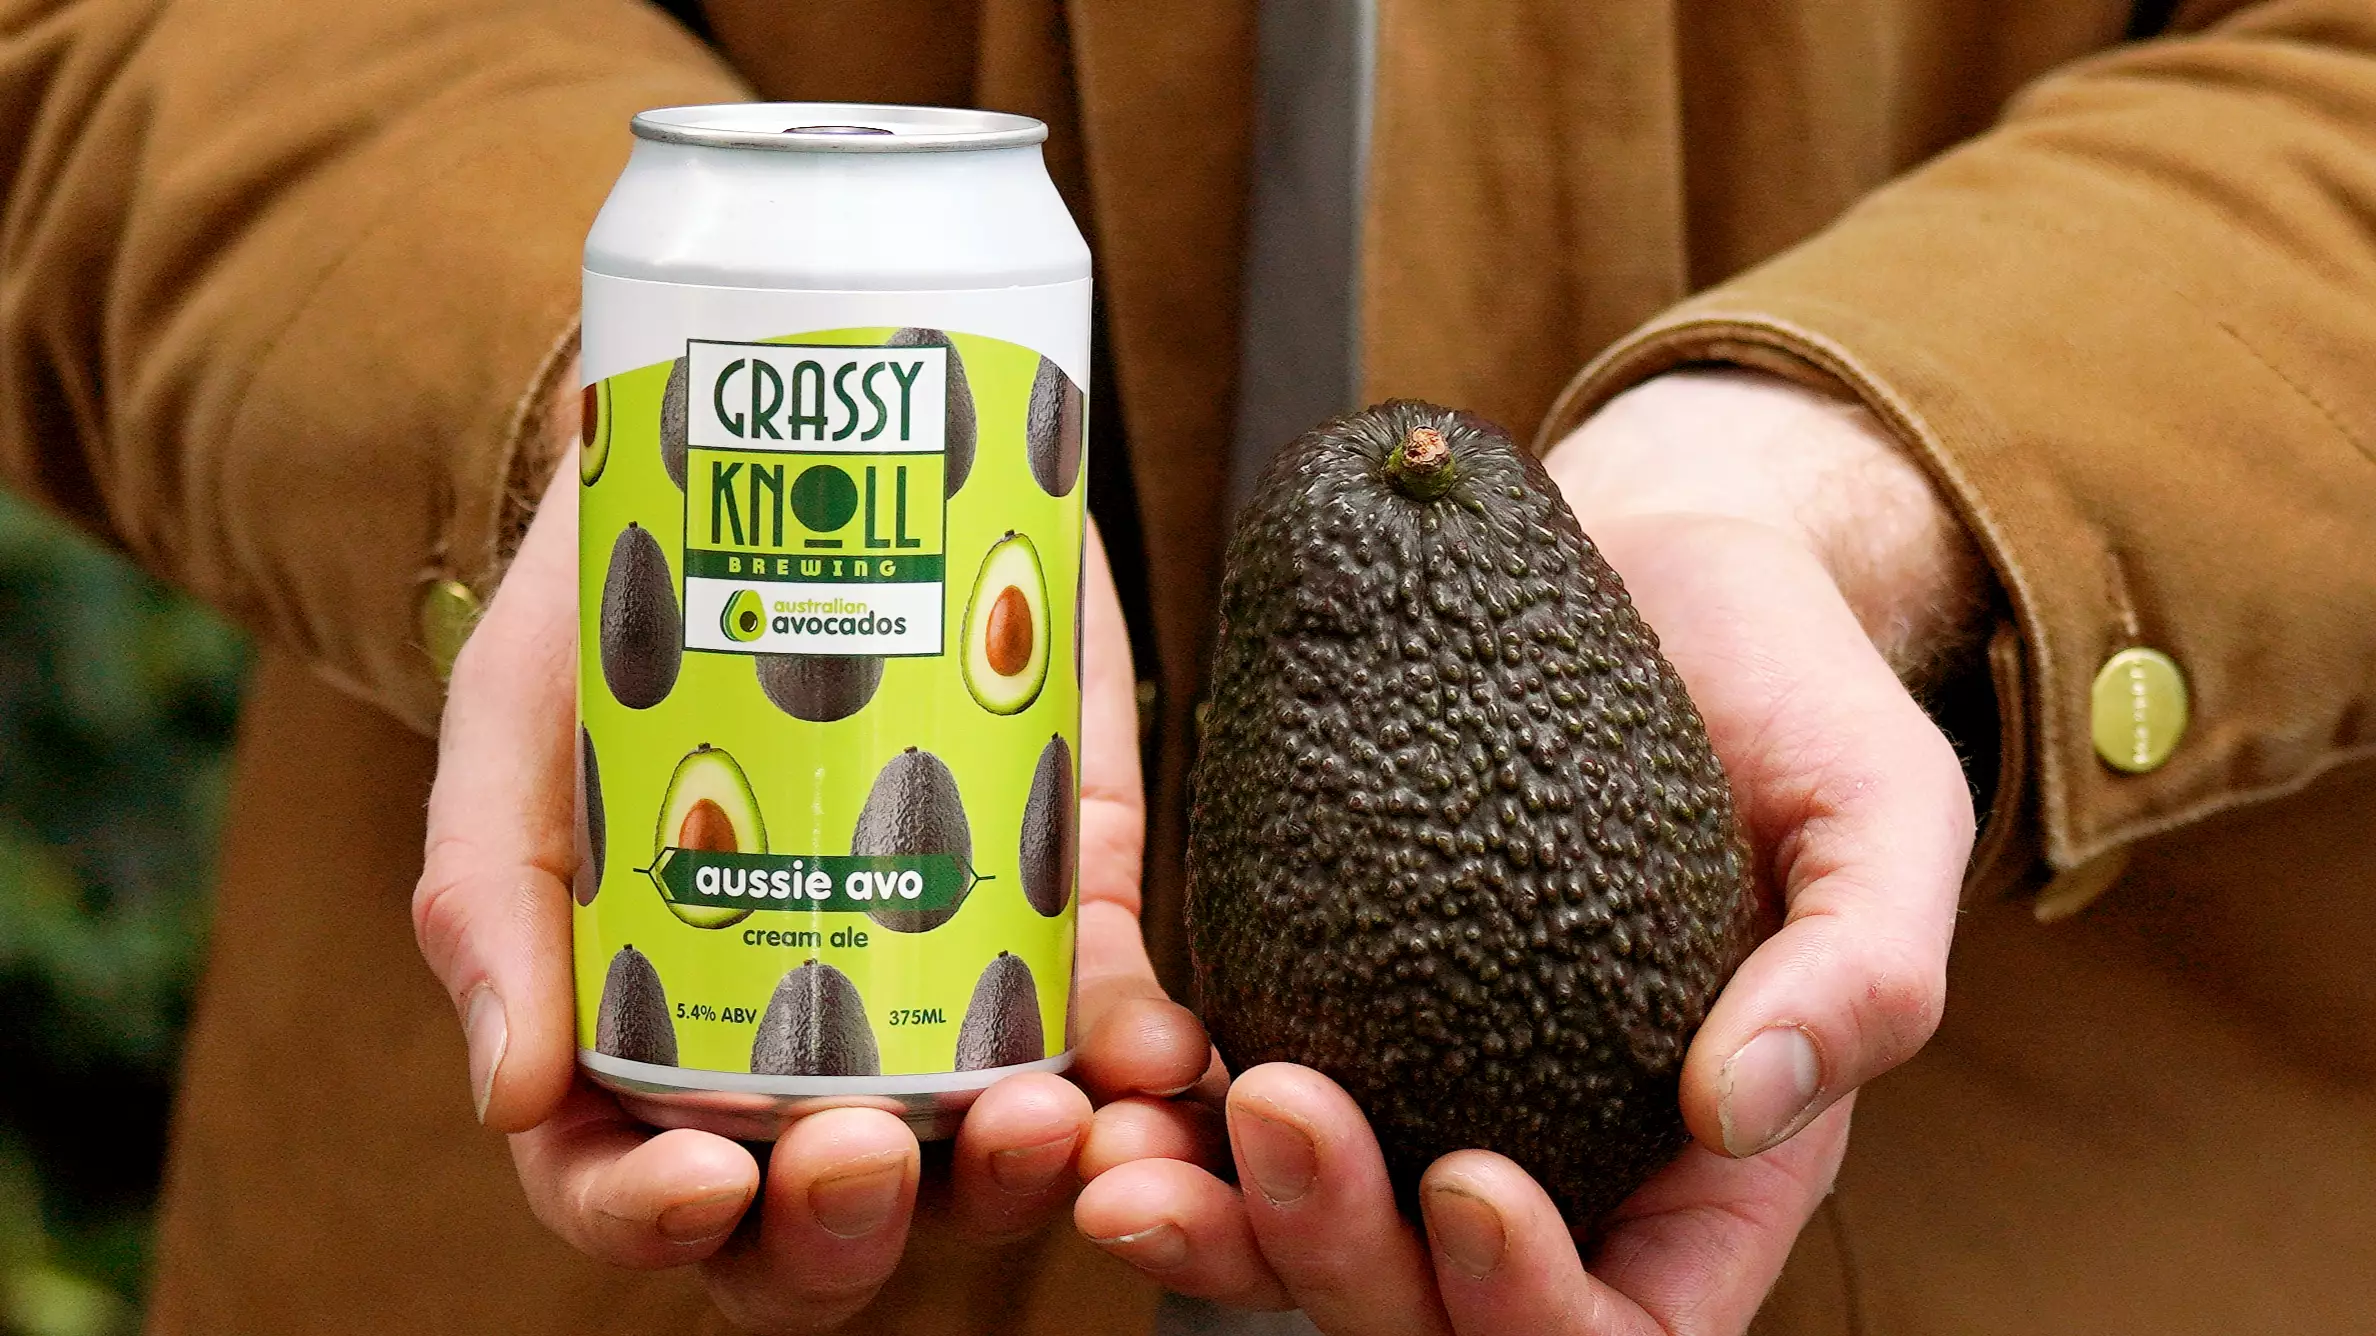 Aussie Company Unveils Beer Made With Avocados